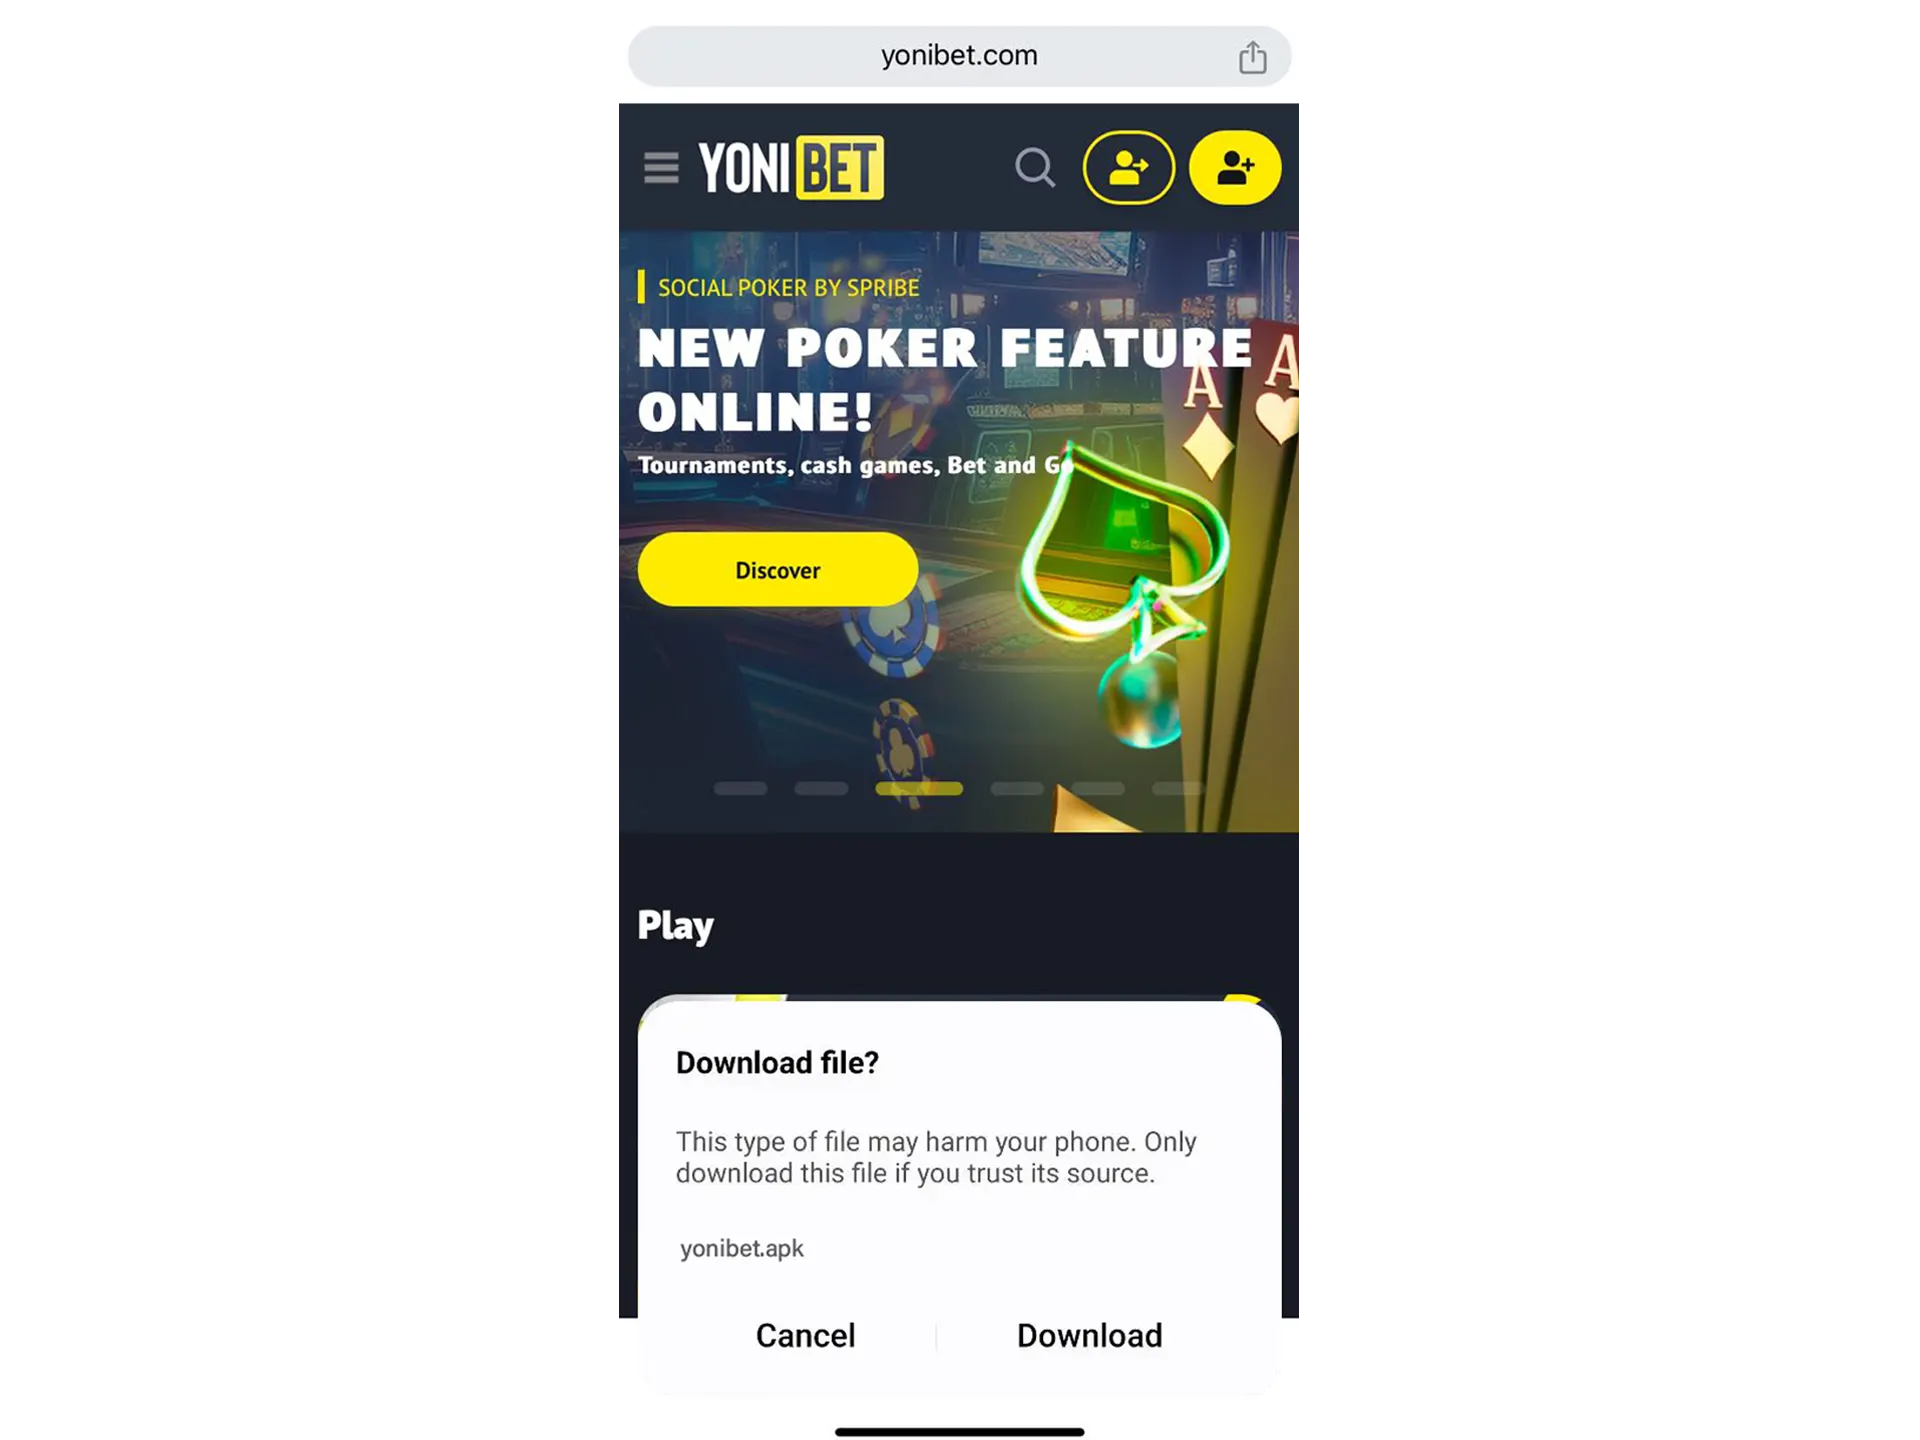 Download the Apk file on the Yonibet website.